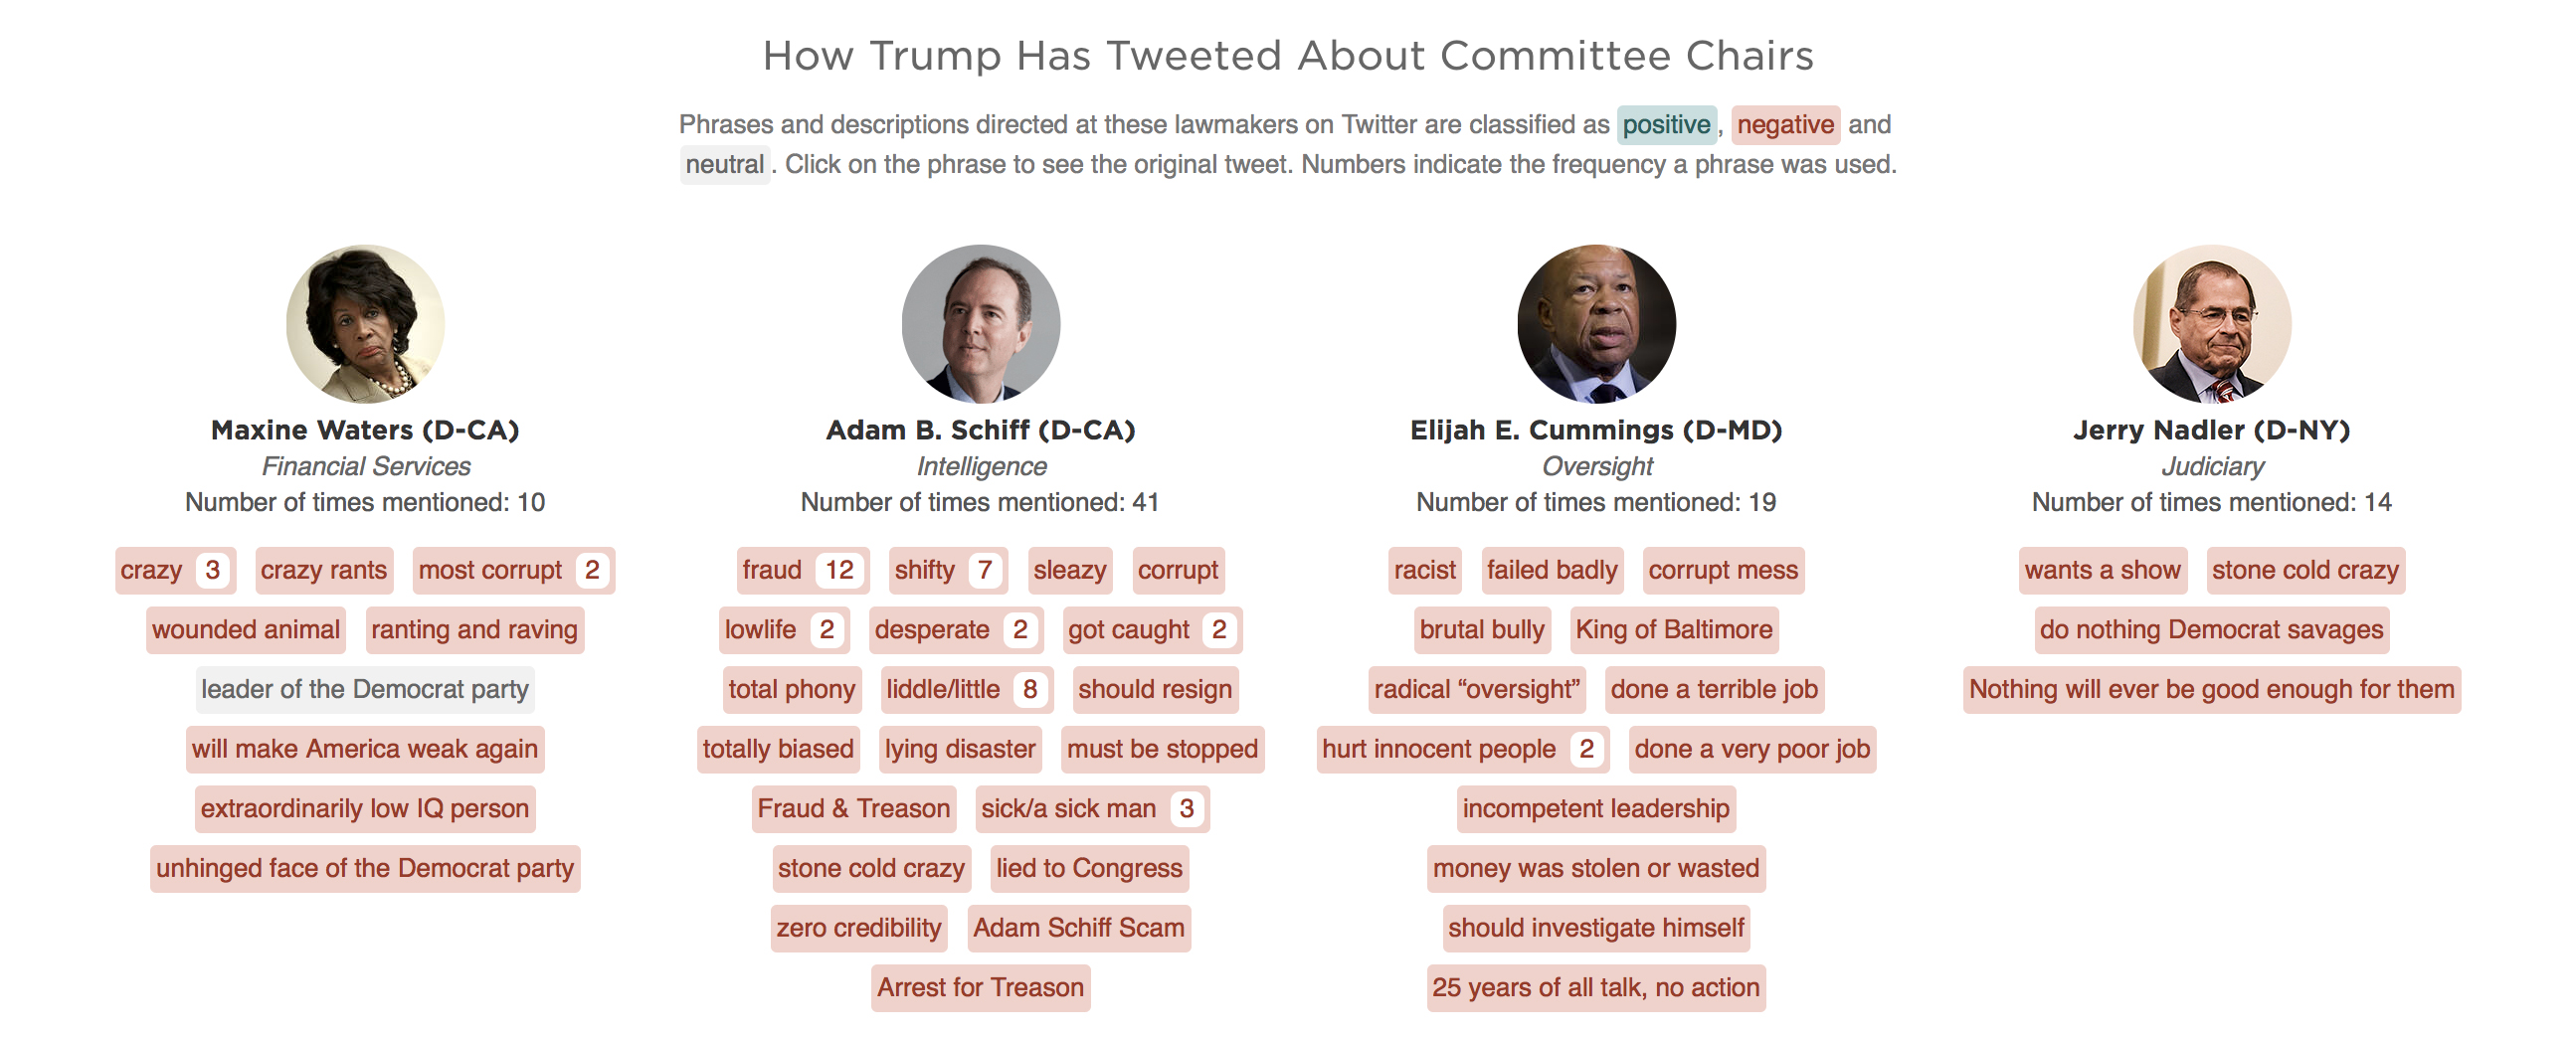 Note: The tweet excerpts shown here are verbatim selections from Donald Trump's tweets. There may be other tweets referencing these individuals that are not shown.  Photos: Alex Wong/Getty Images (Waters); Claire Harbage/NPR (Schiff); Saul Loeb/AFP/Getty 